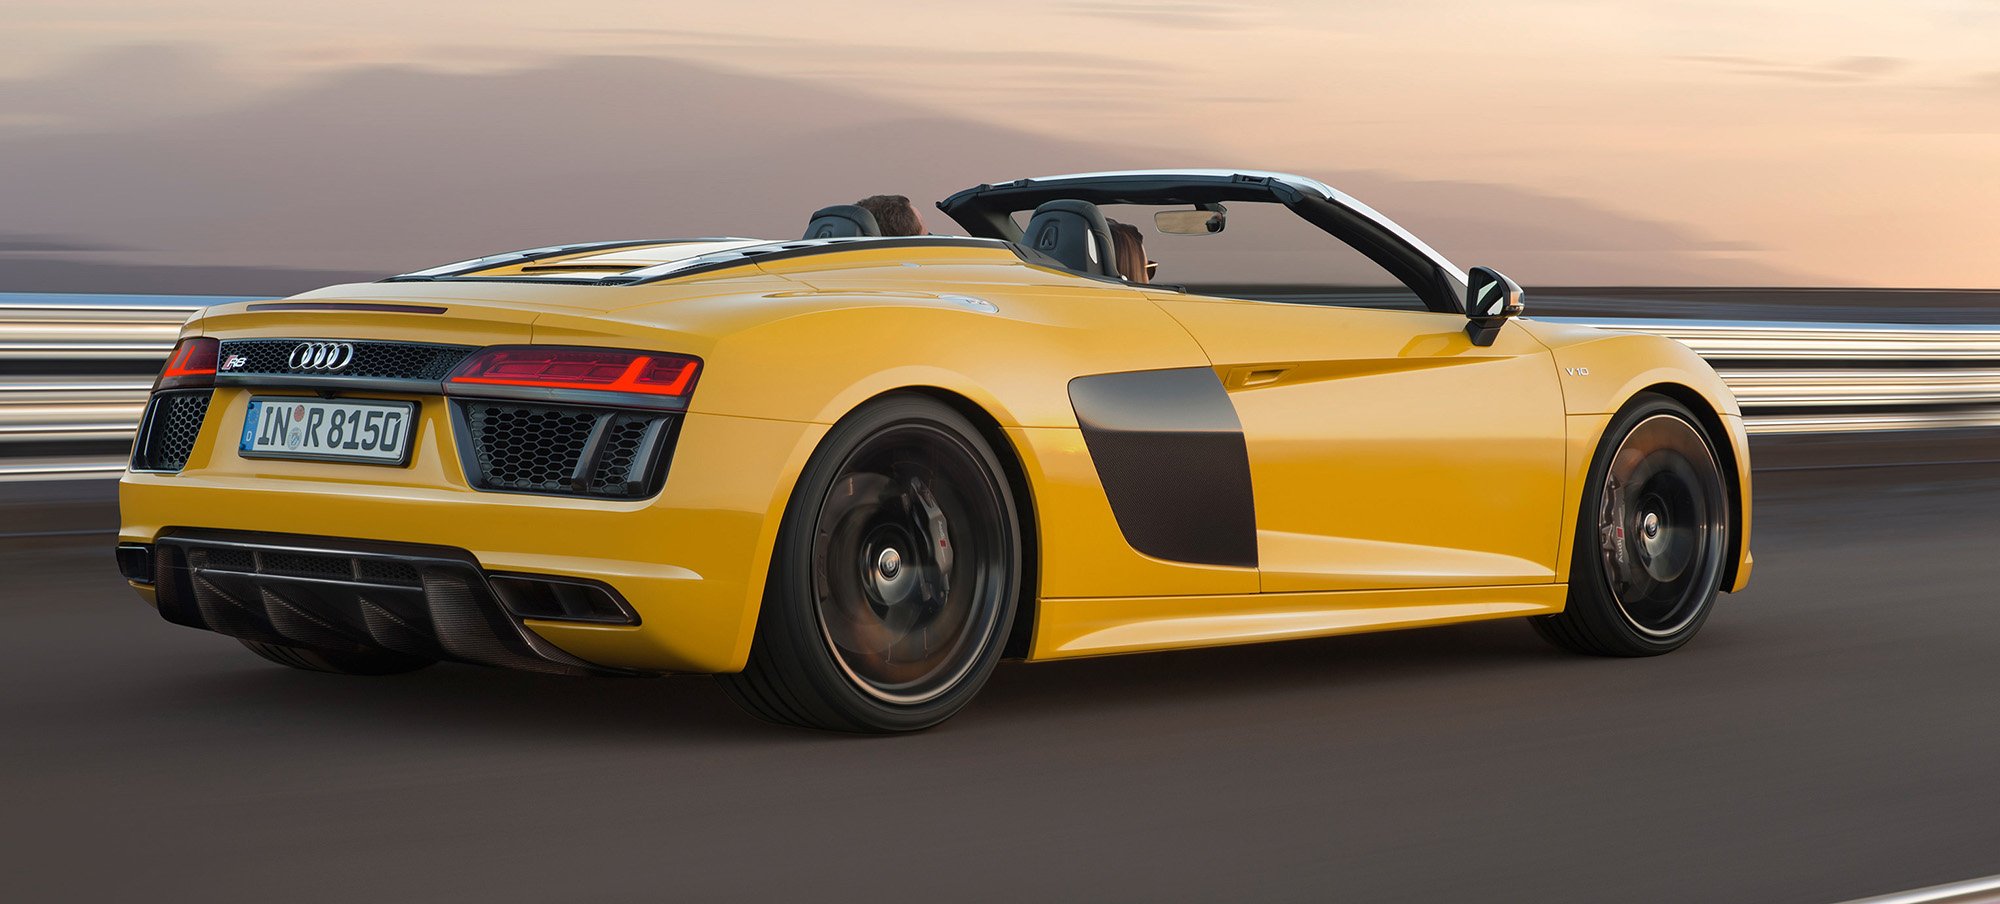 Experience Luxury And Power With The 2017 Audi R8 Spyder V10